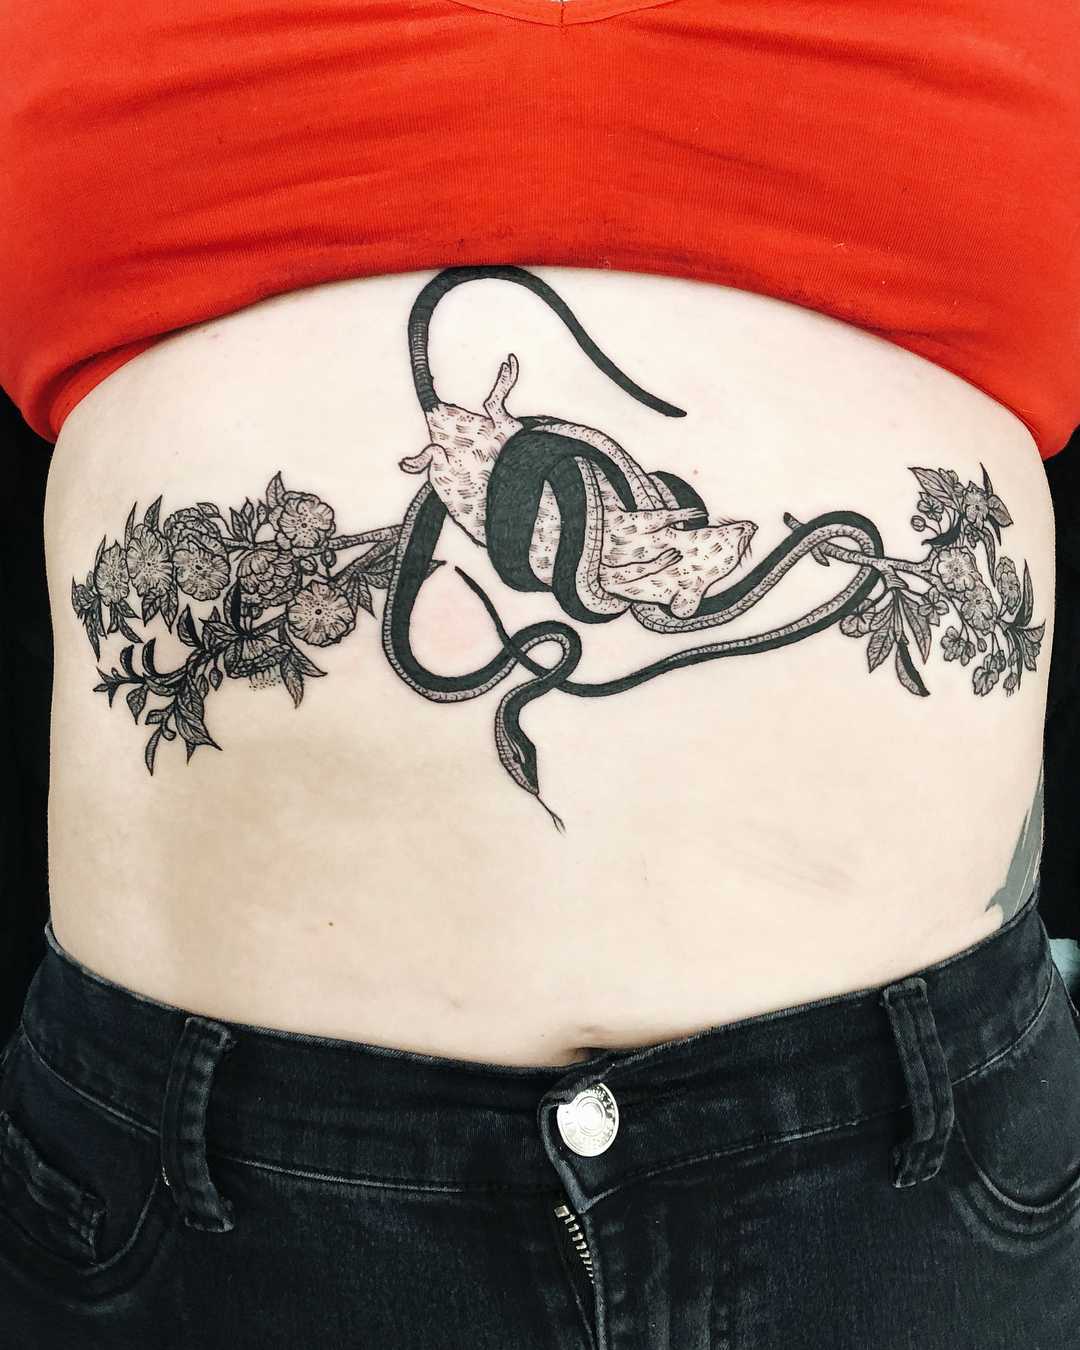 Rat, snake, and flowers tattoo